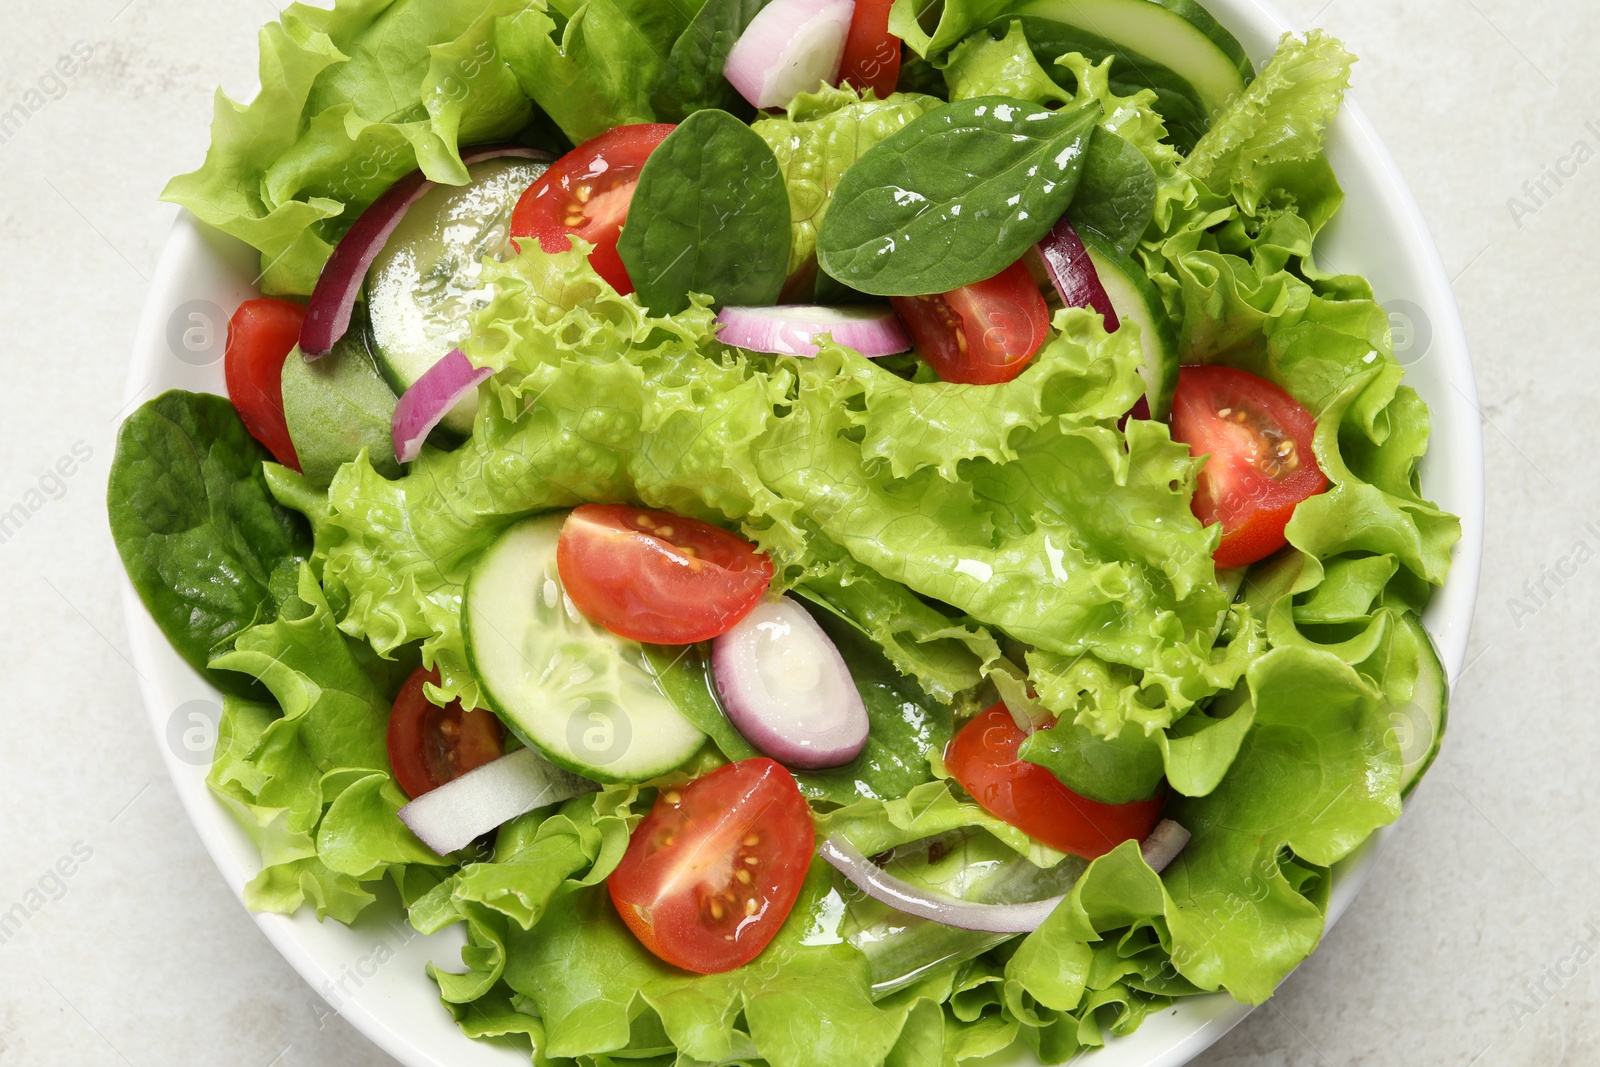 Photo of Delicious salad in bowl on light grey table, top view